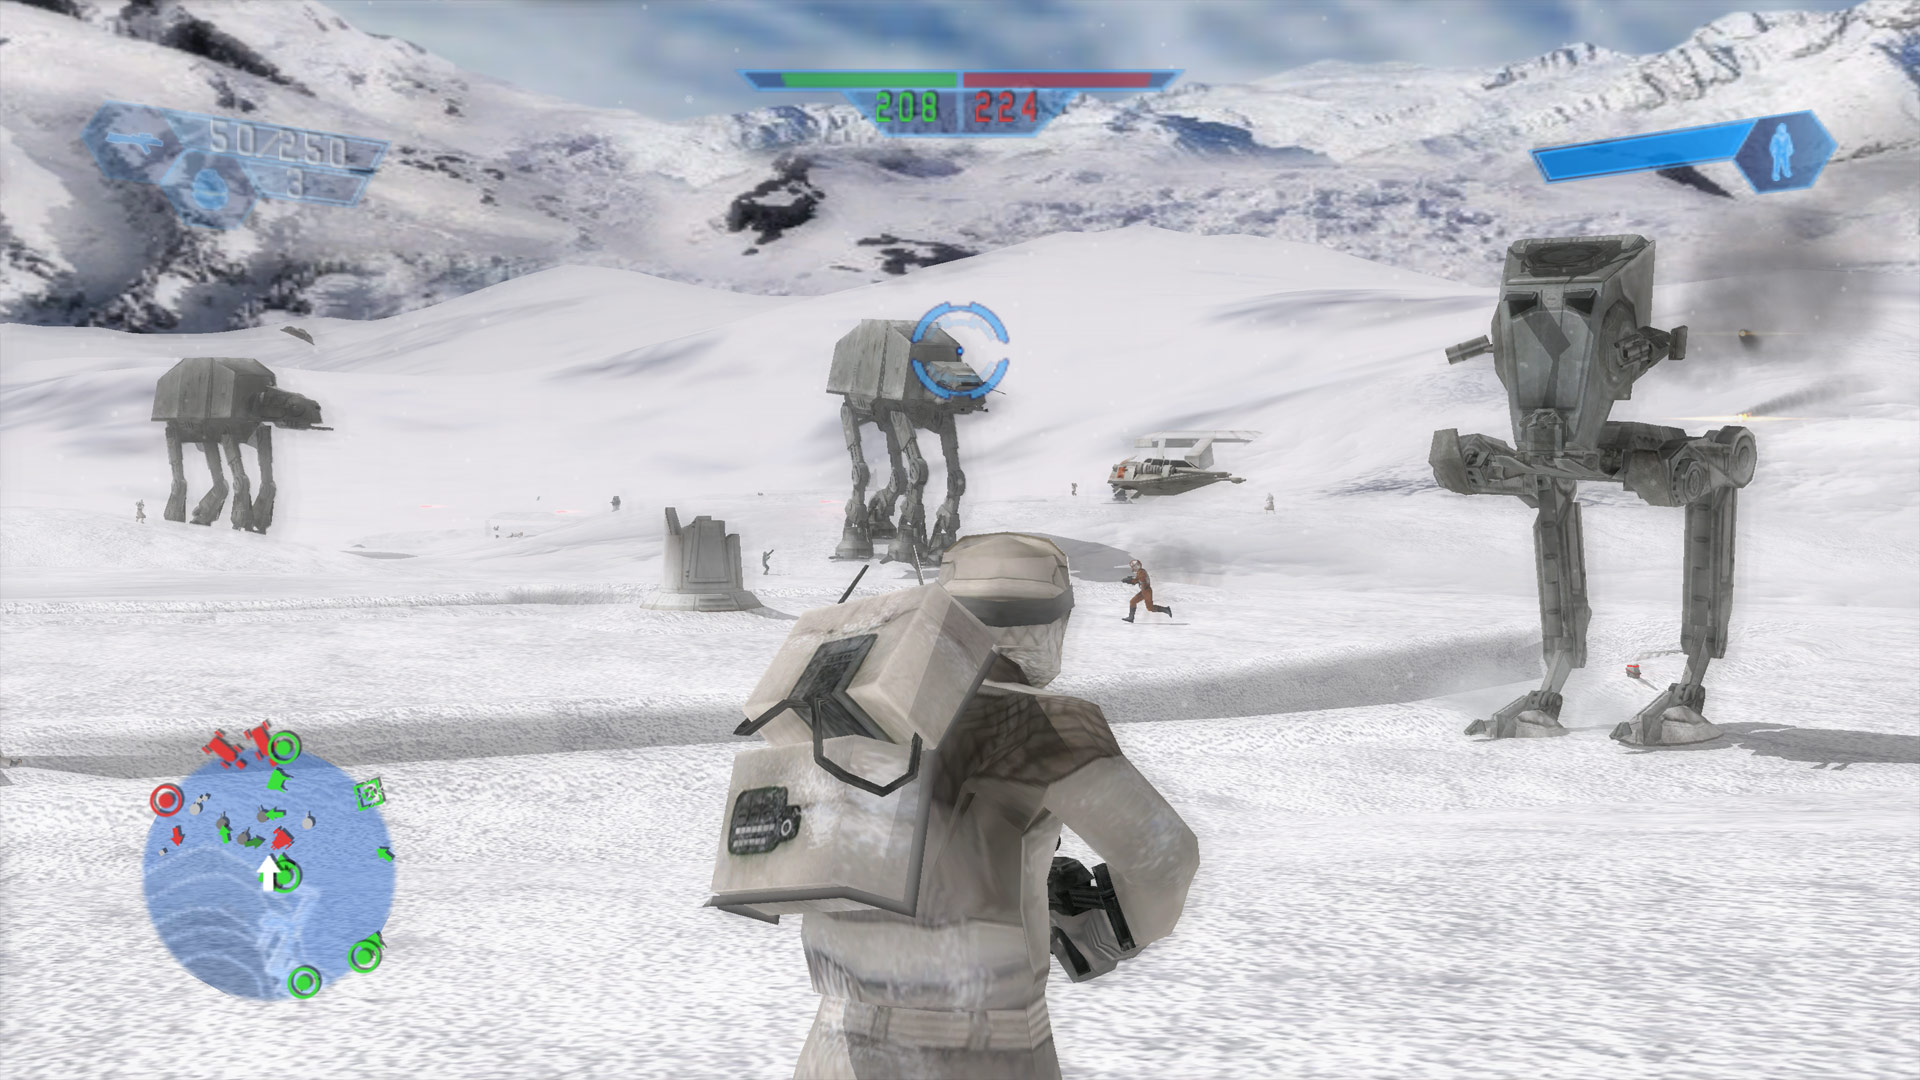 Star wars battlefront classic collection switch. Star Wars Battlefront (Classic, 2004). Star Wars Battlefront Xbox. Батлфронт 1 2004. Star Wars Battlefront 1.